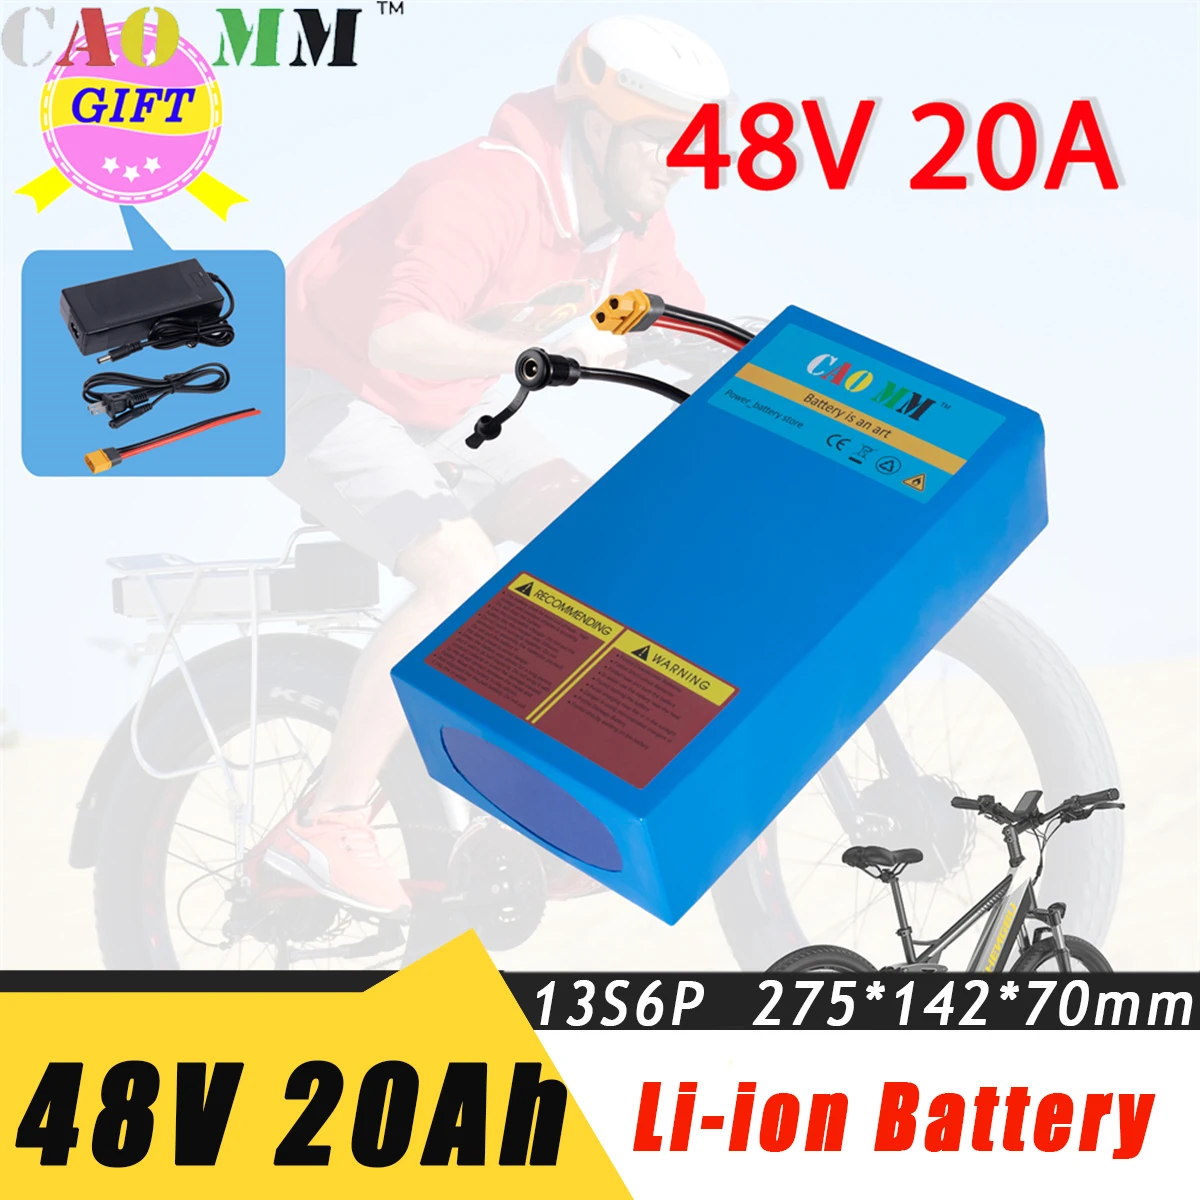 

CaoMM 36V 48V Electric Bike Lithium Battery Pack 8 10 20Ah Li ion Ebike Battery for Bicycle Scooter Motorcycle with Charger